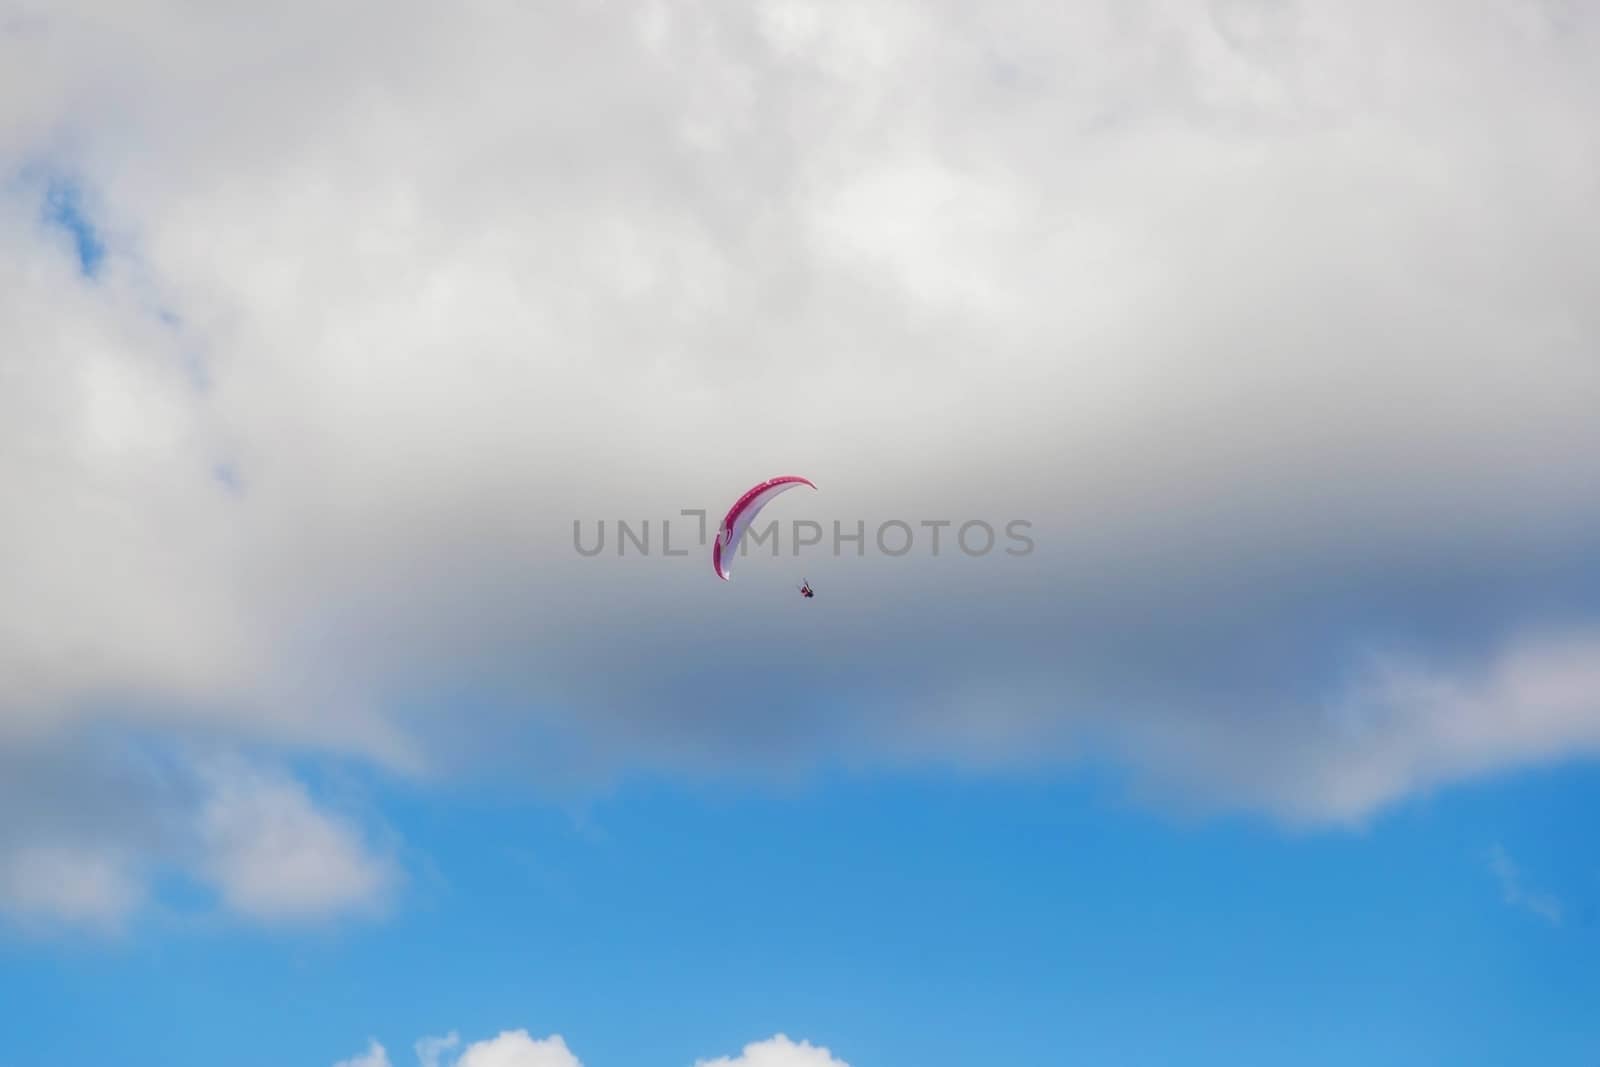 One paraglider is flying in the blue sky against the background of clouds. Paragliding in the sky on a sunny day.